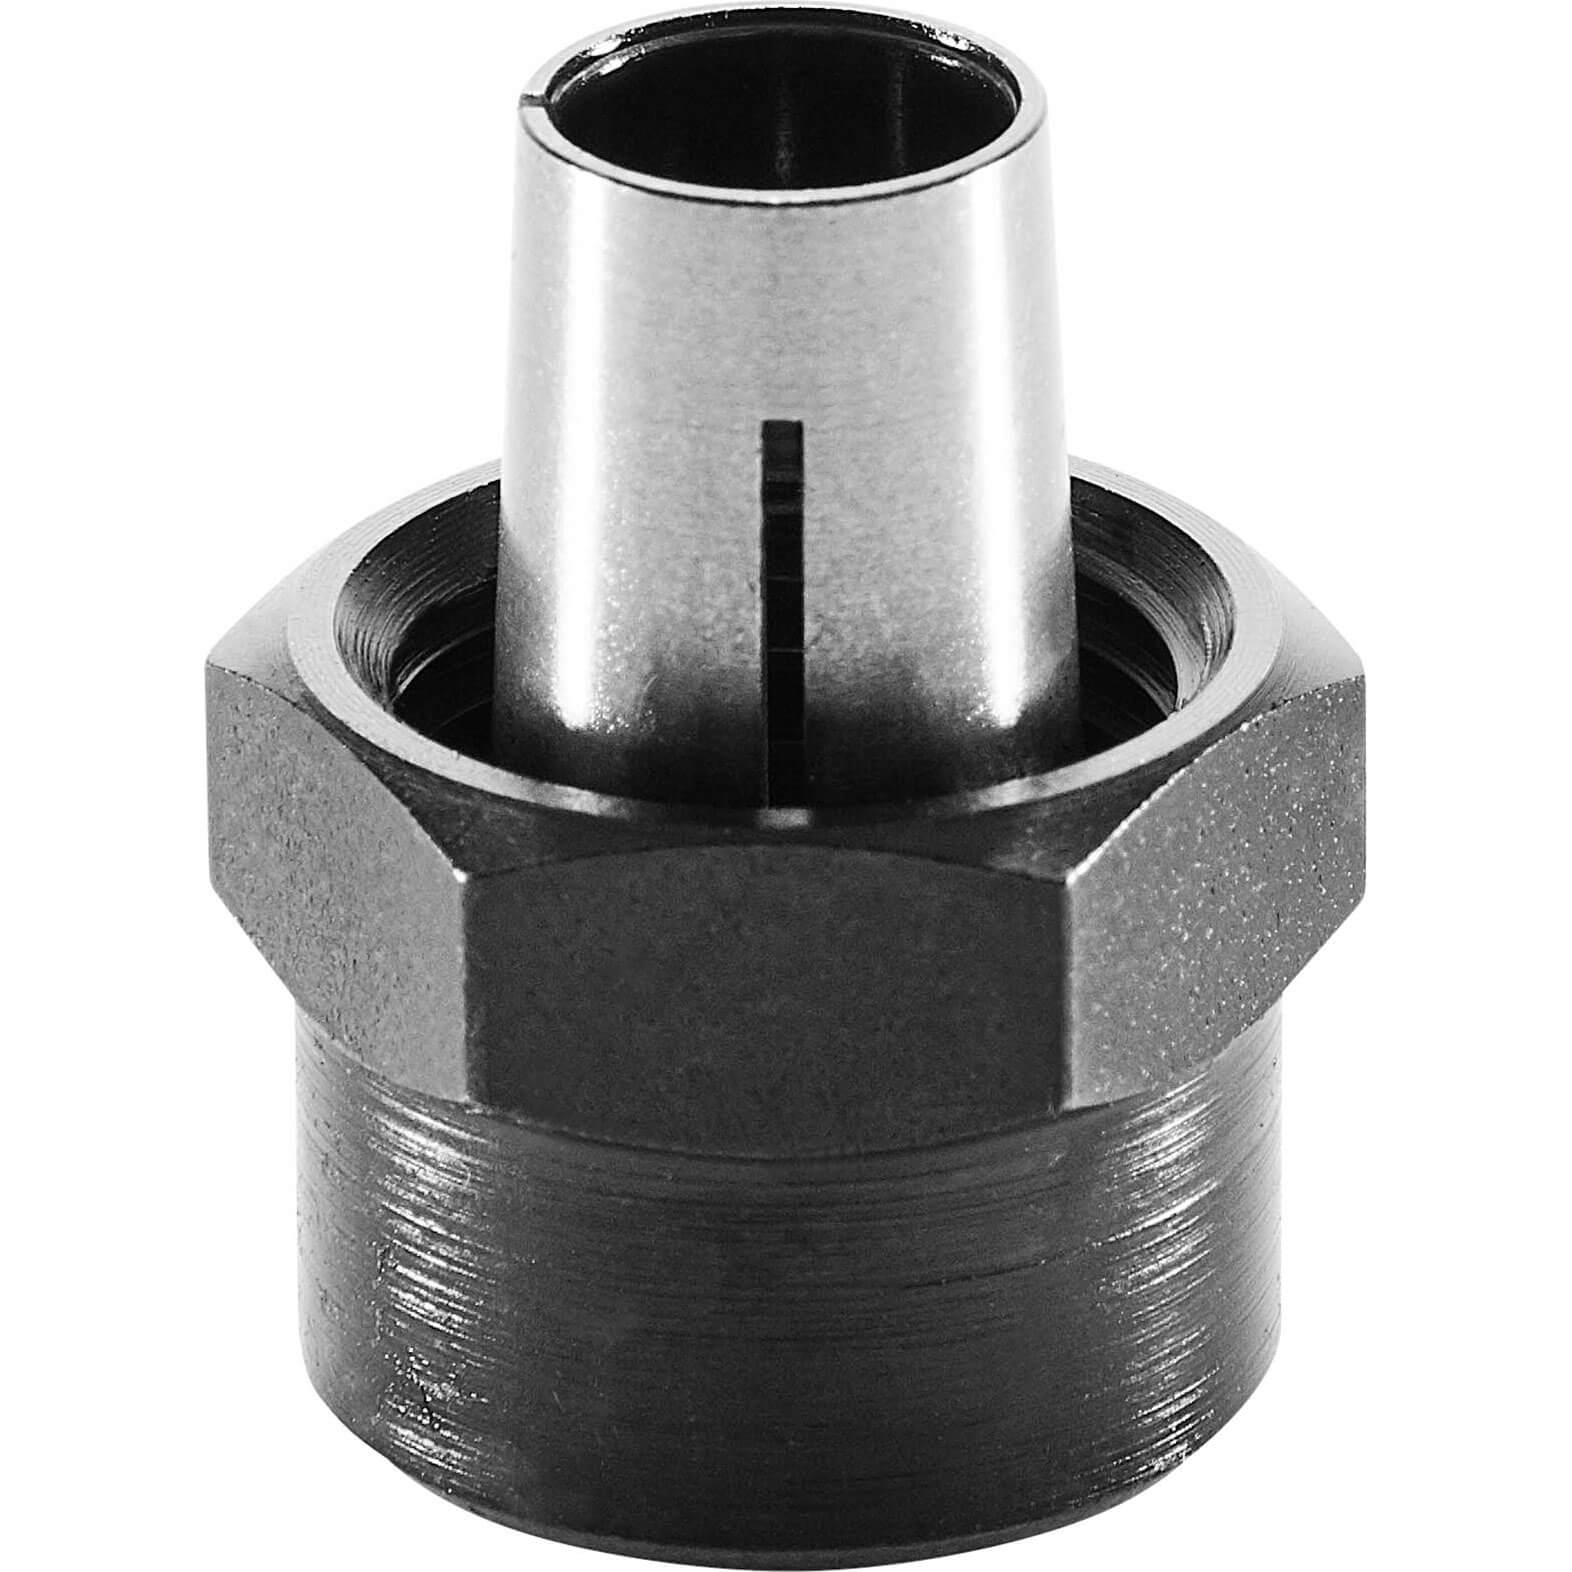 Image of Festool Router Collet For Festool Router OF1010 6mm